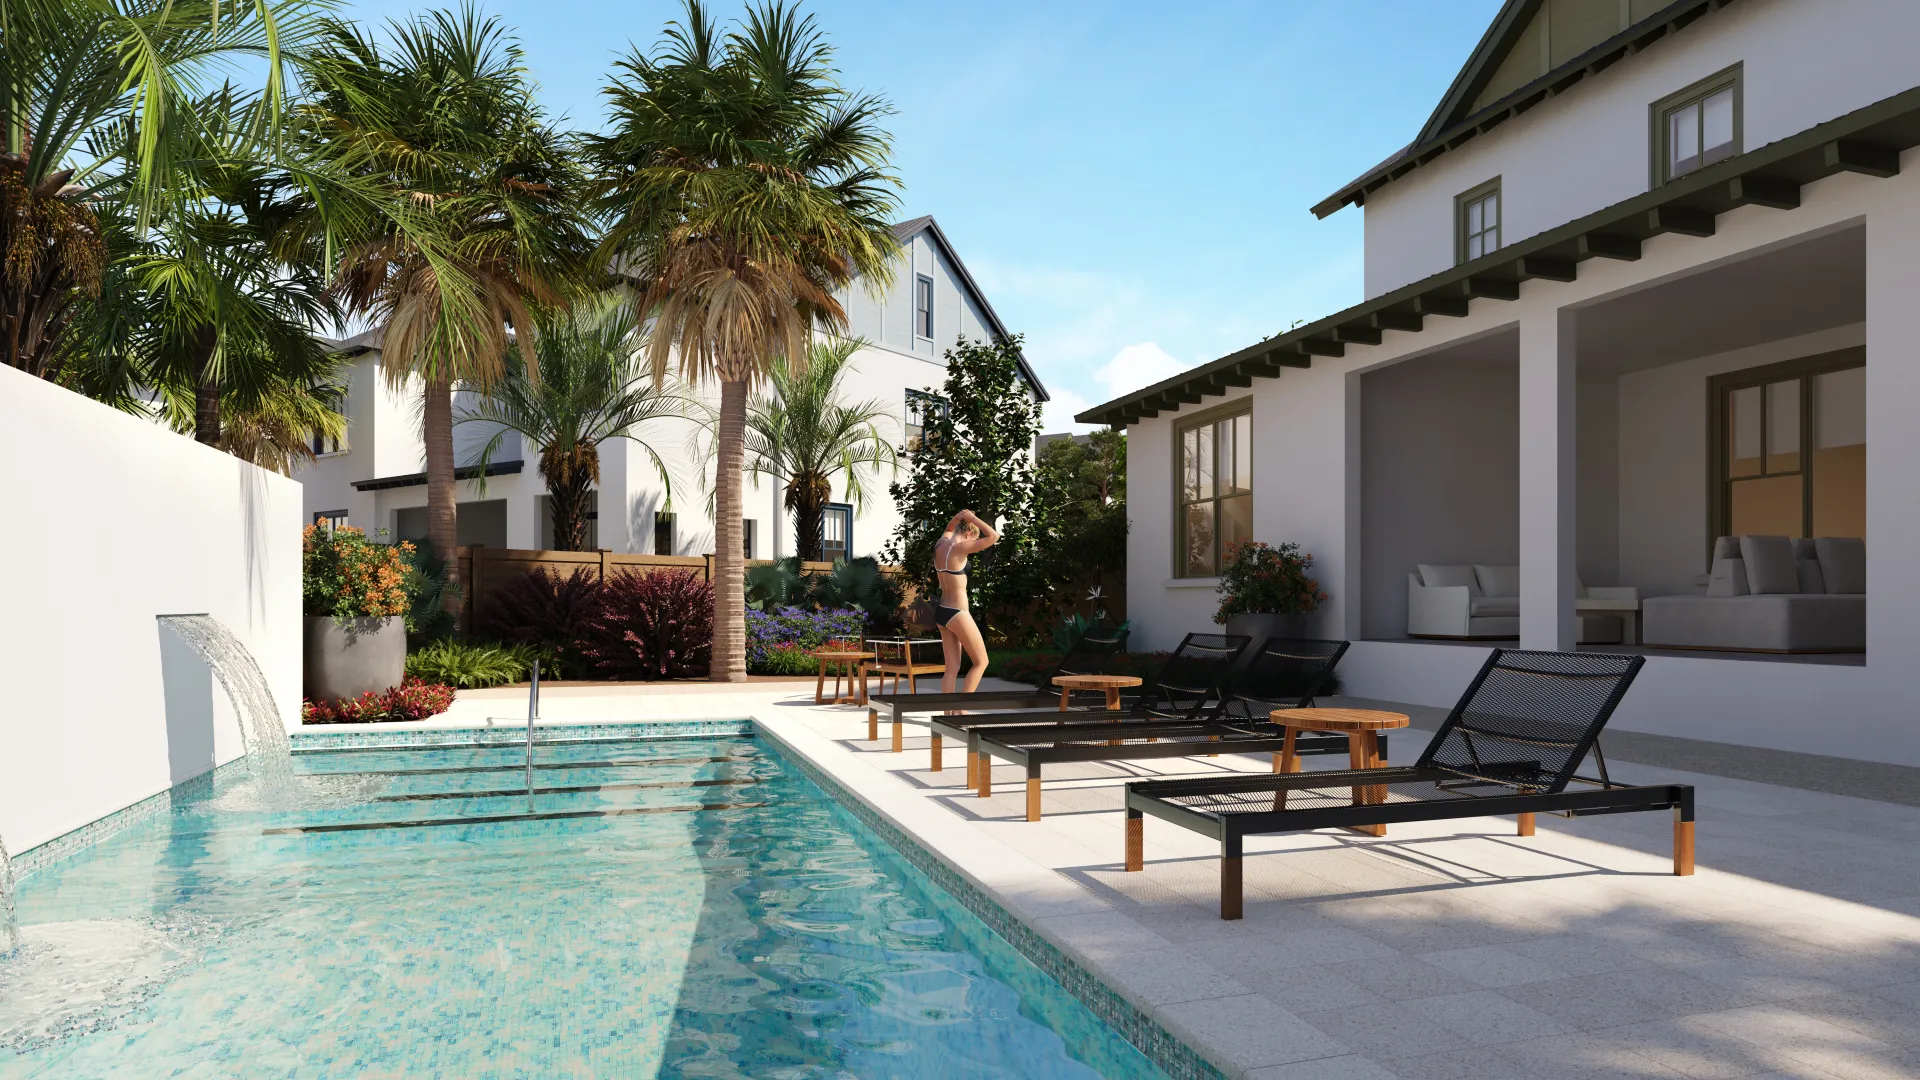 Houses Exterior Image of Backyard Garden/Pool Area with Lounge Chairs 